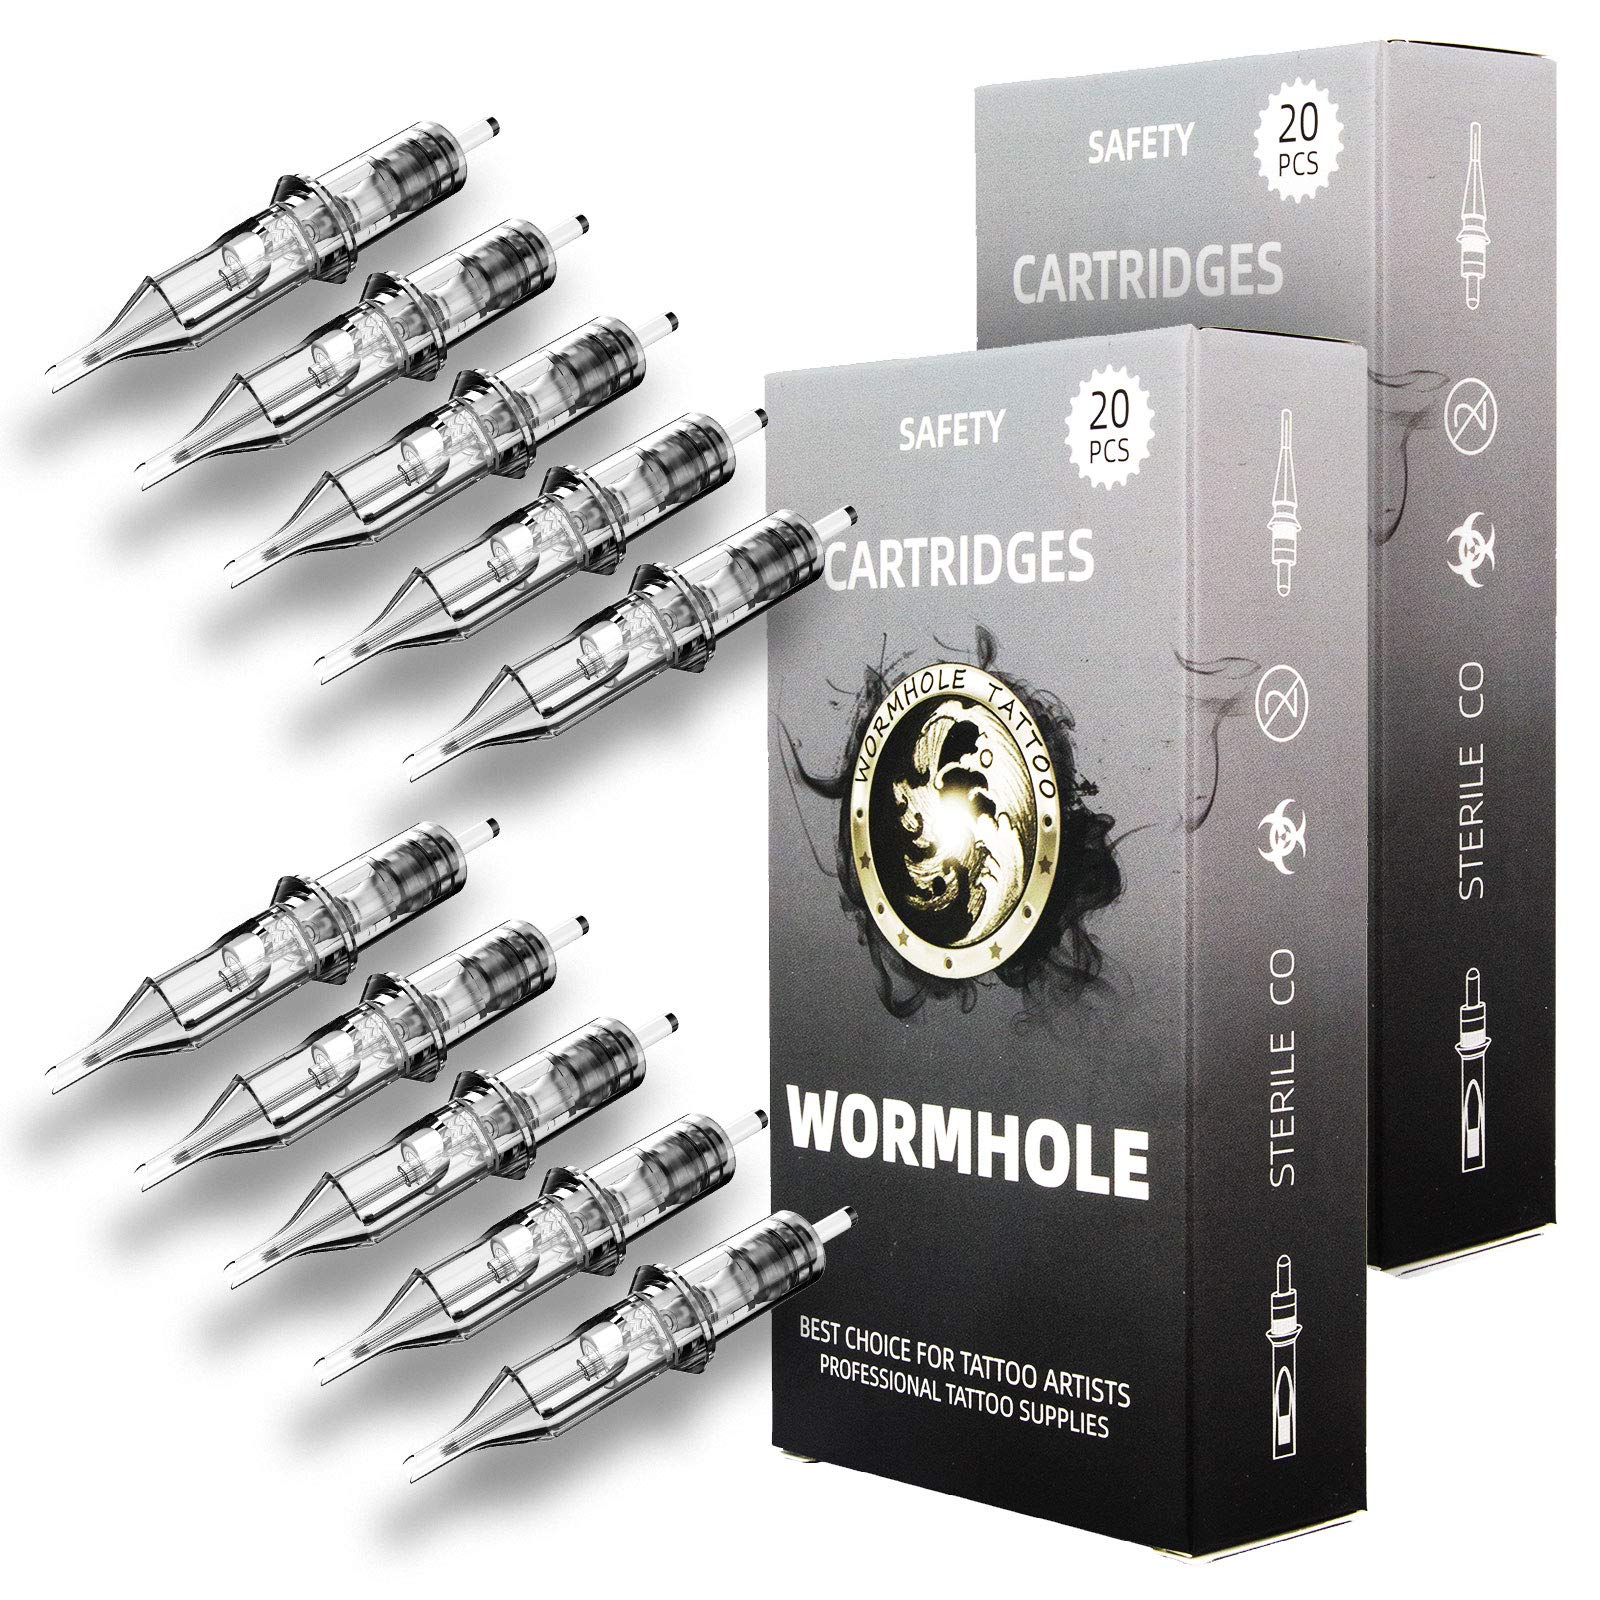  Wormhole 5MG 5Mag Tattoo Needles 5 Magnum #12 Standard  Disposable & Sterilized Tattoo Shading Needles with Blue Dot - Box of 50  (1205MG) : Everything Else